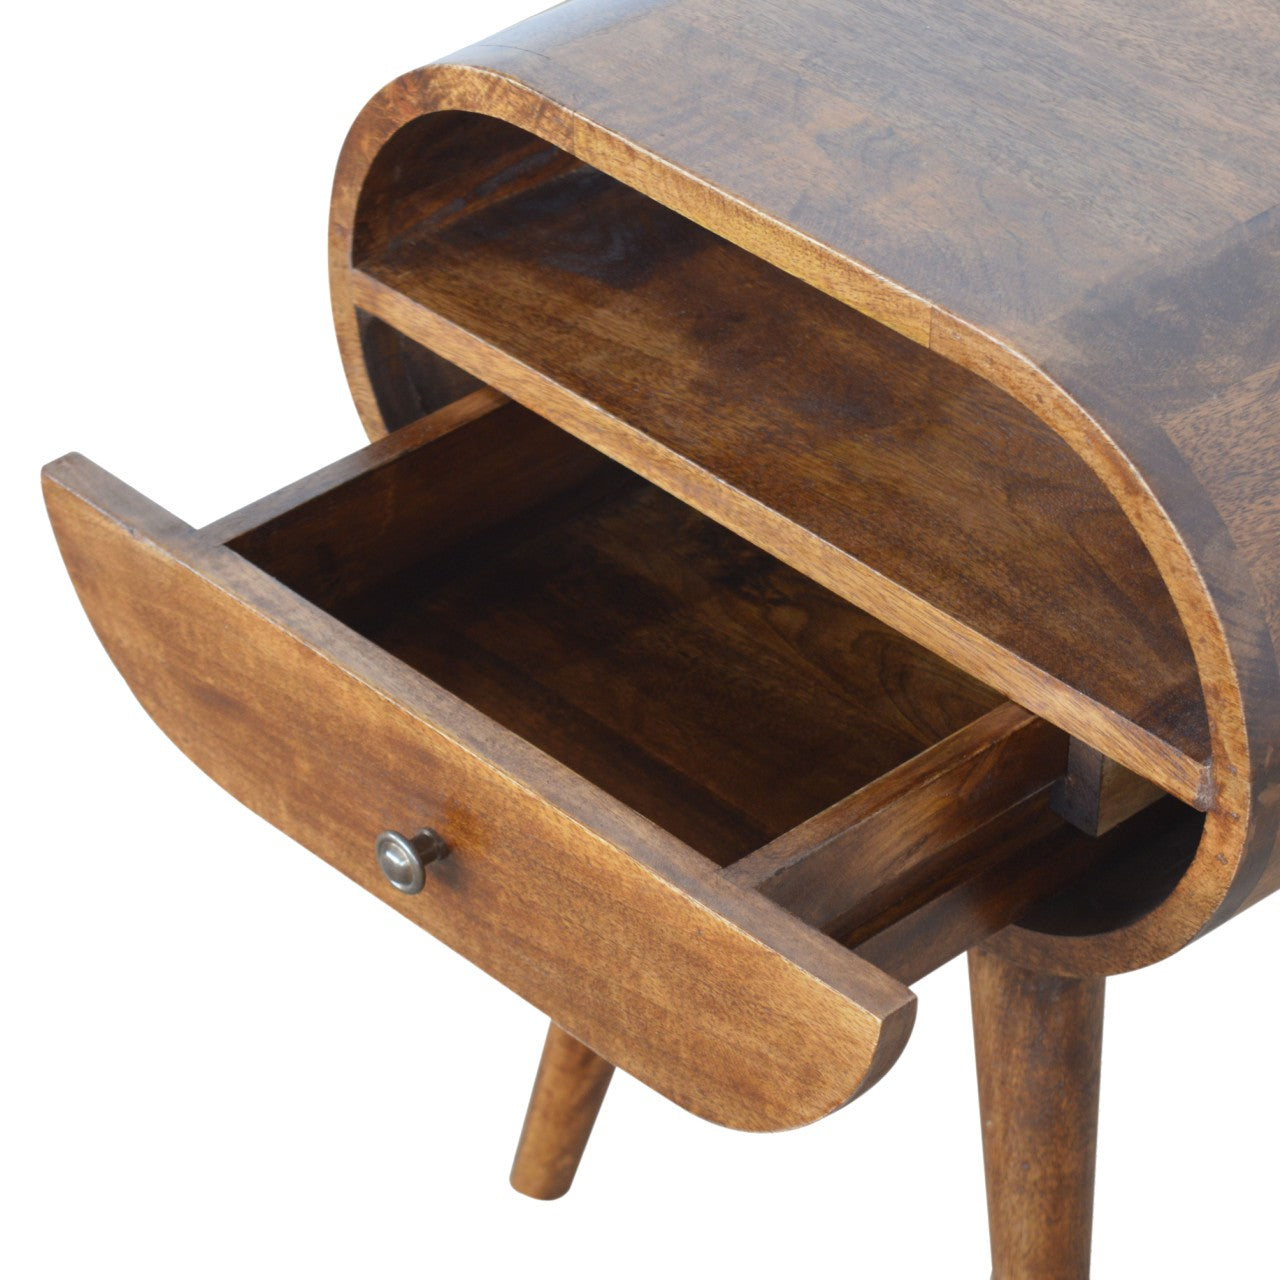 Chestnut Circular Bedside Table with Open Slot